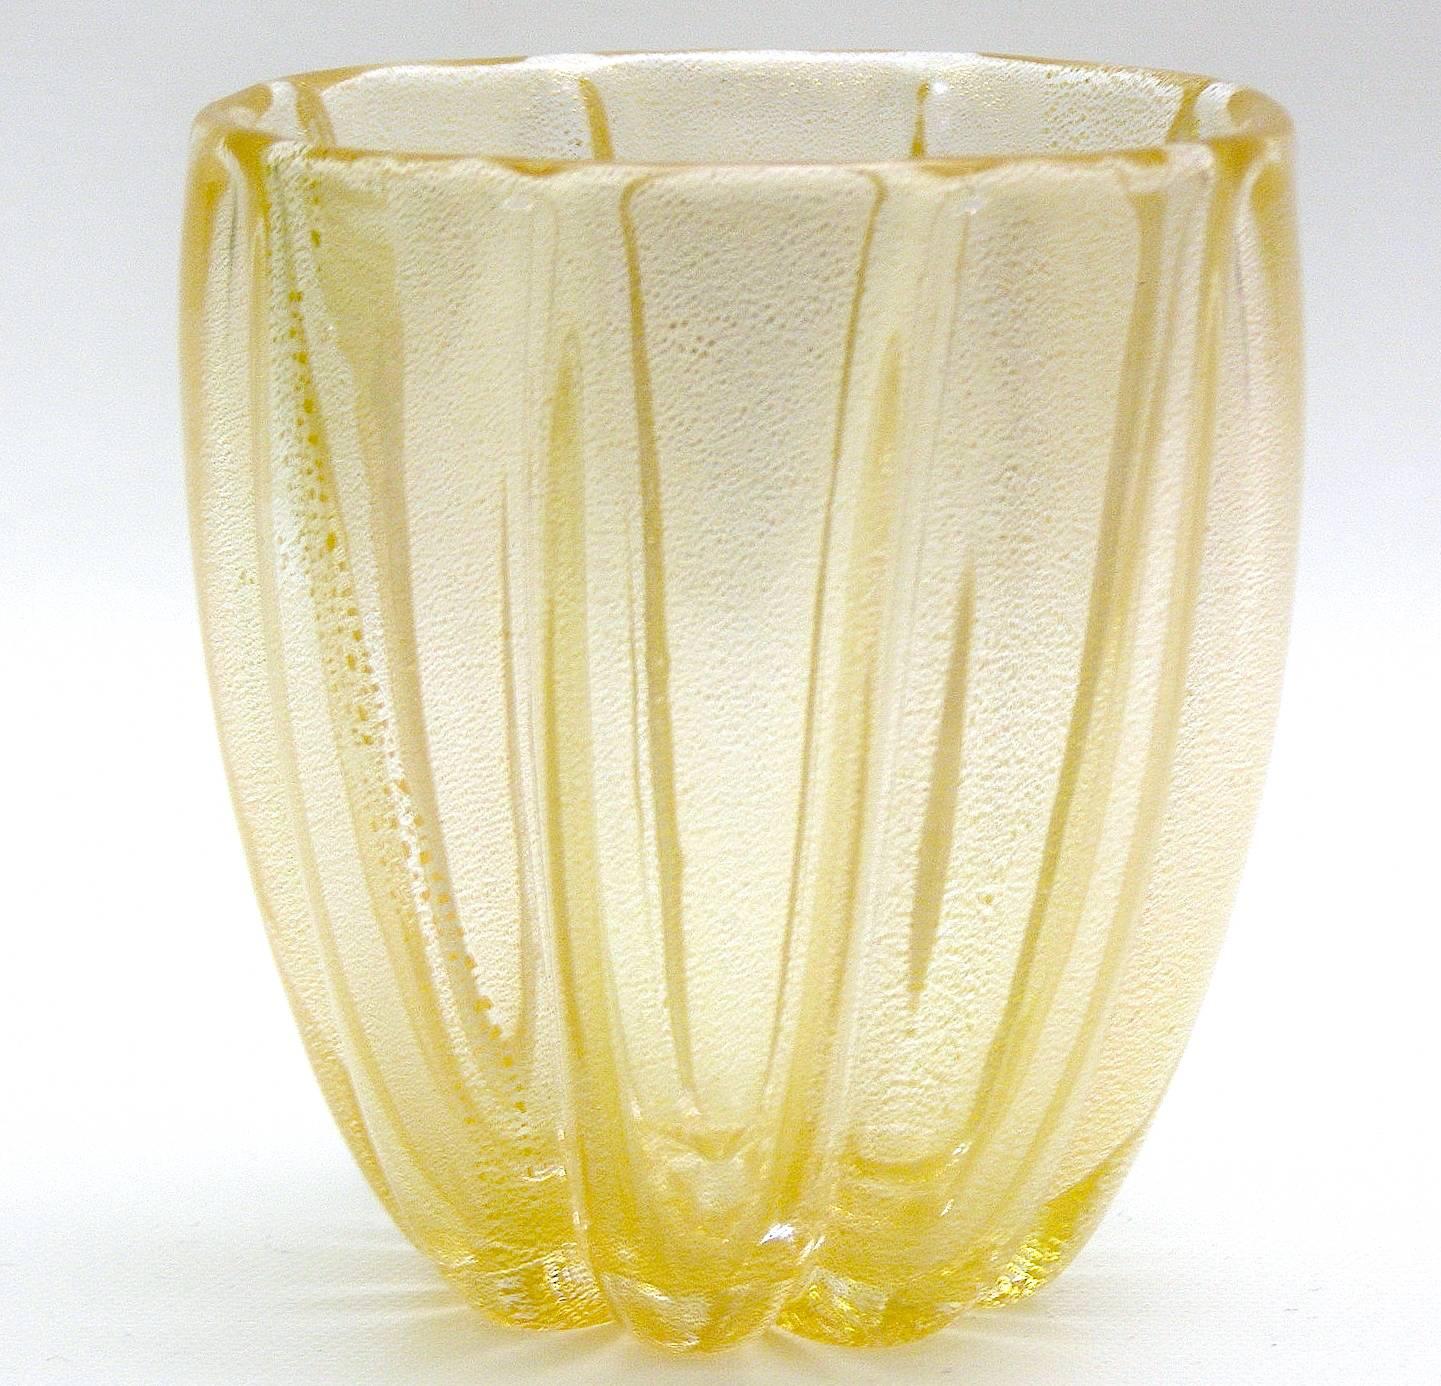 Beautiful handblown fluted Murano glass vessel by Barovier e Toso. Filled with aventurine (gold leaf flecking) producing this splendid golden color.